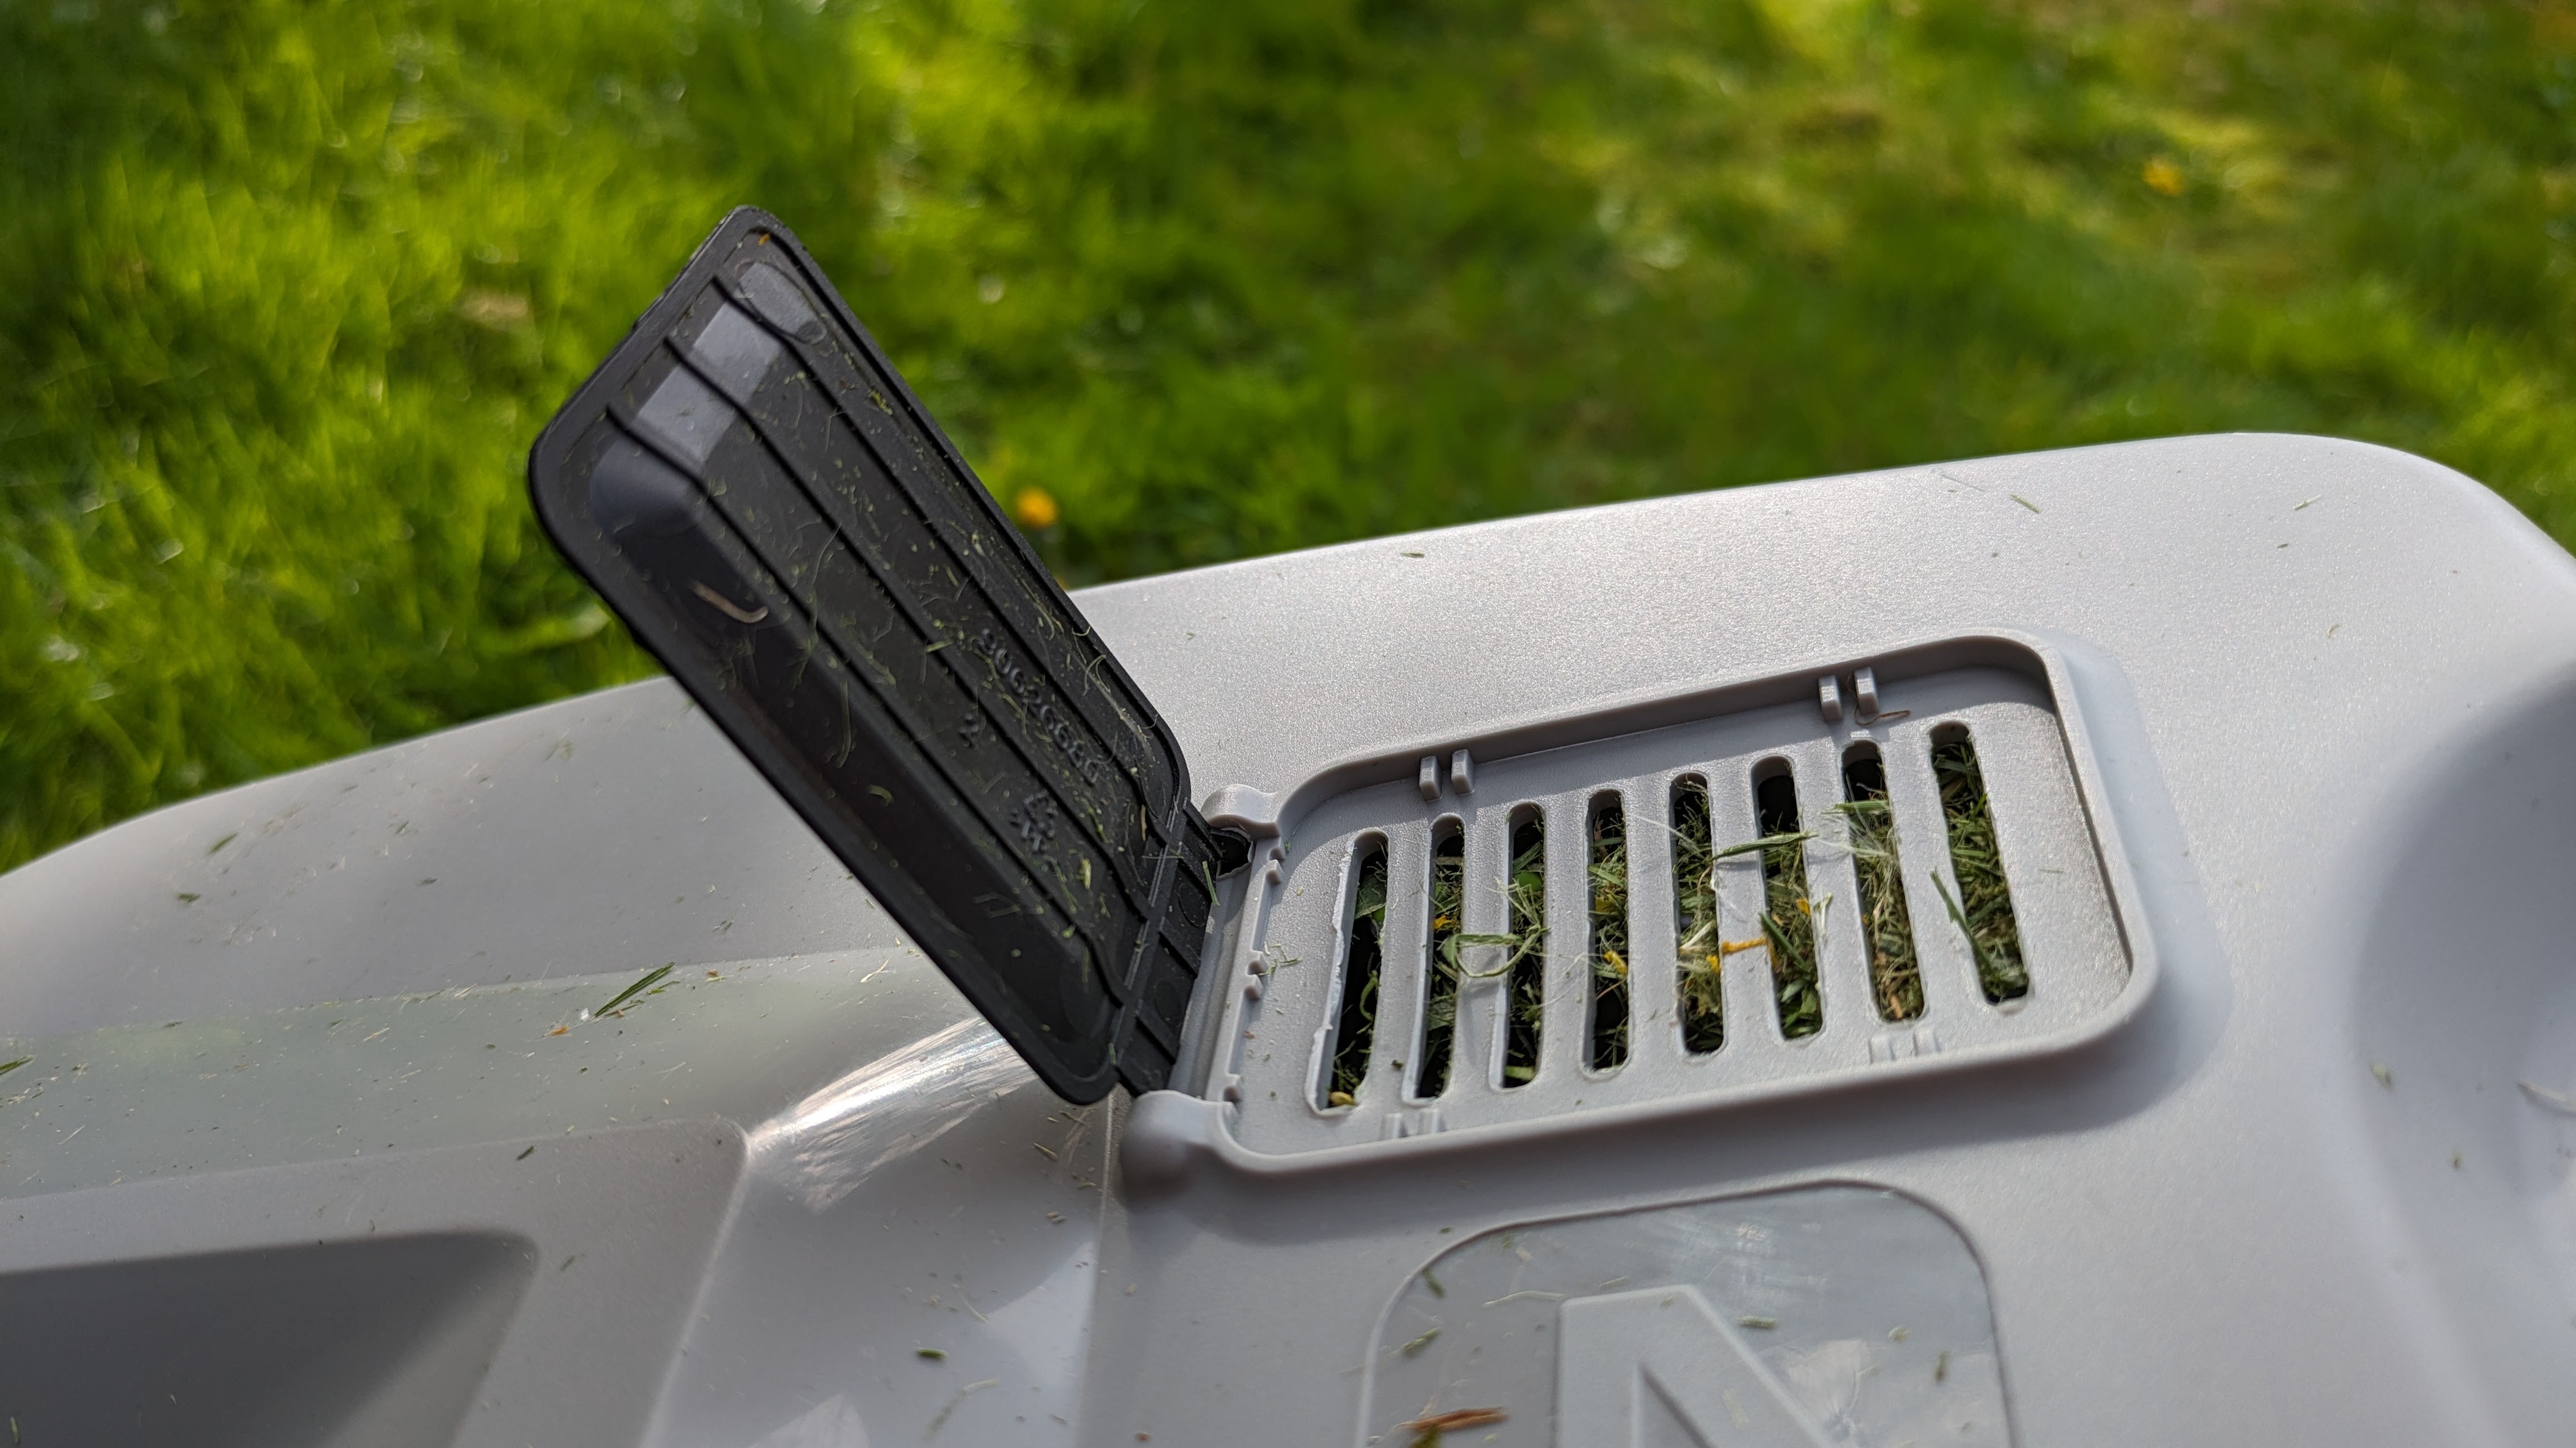 We like this little fill status indicator on the grass box of Black + Decker's lawn mower.